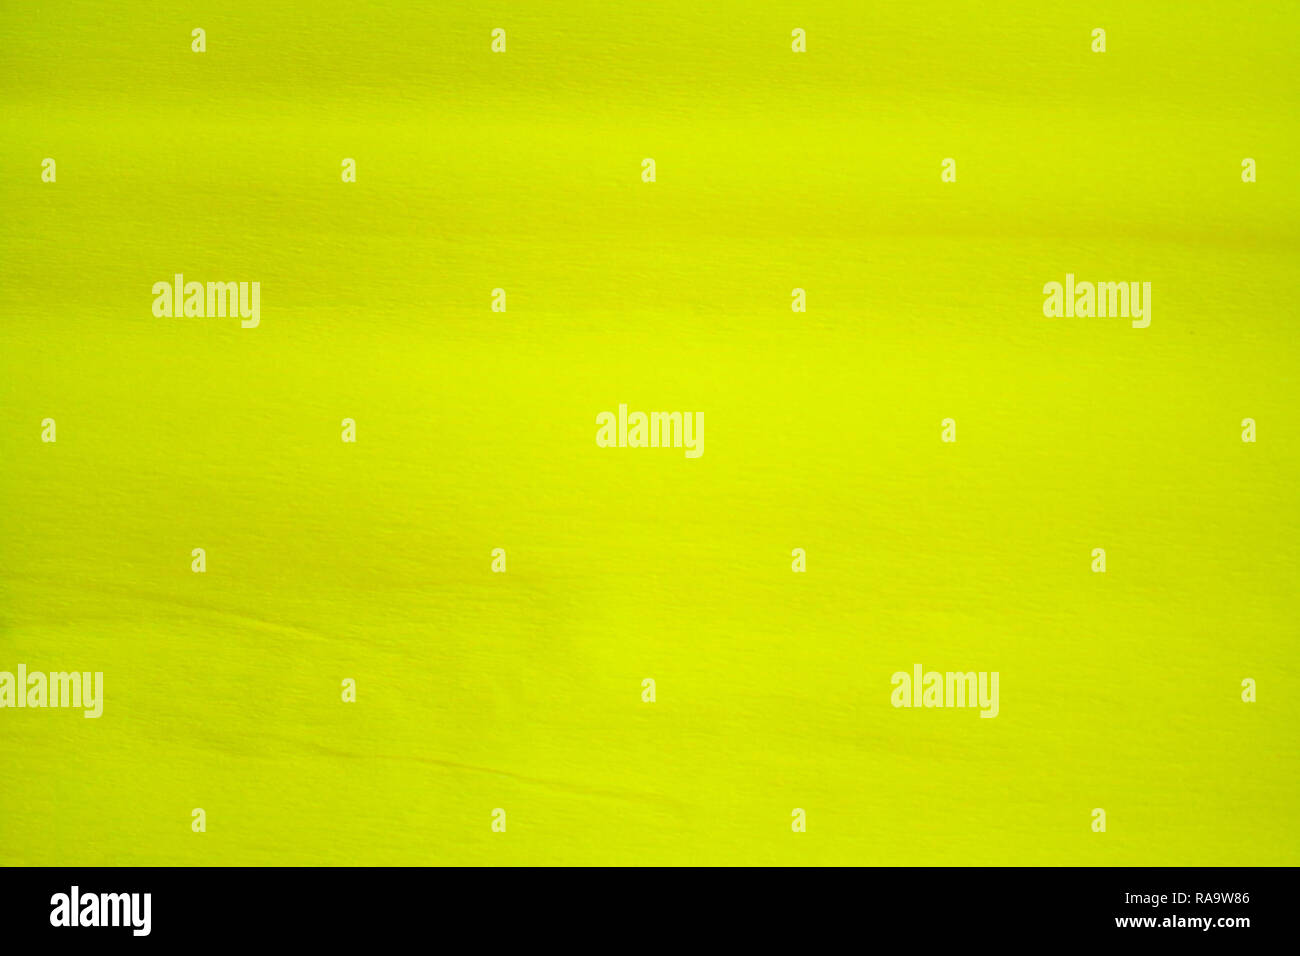 Corrugated yellow paper texture. Yellow abstract background Stock Photo ...